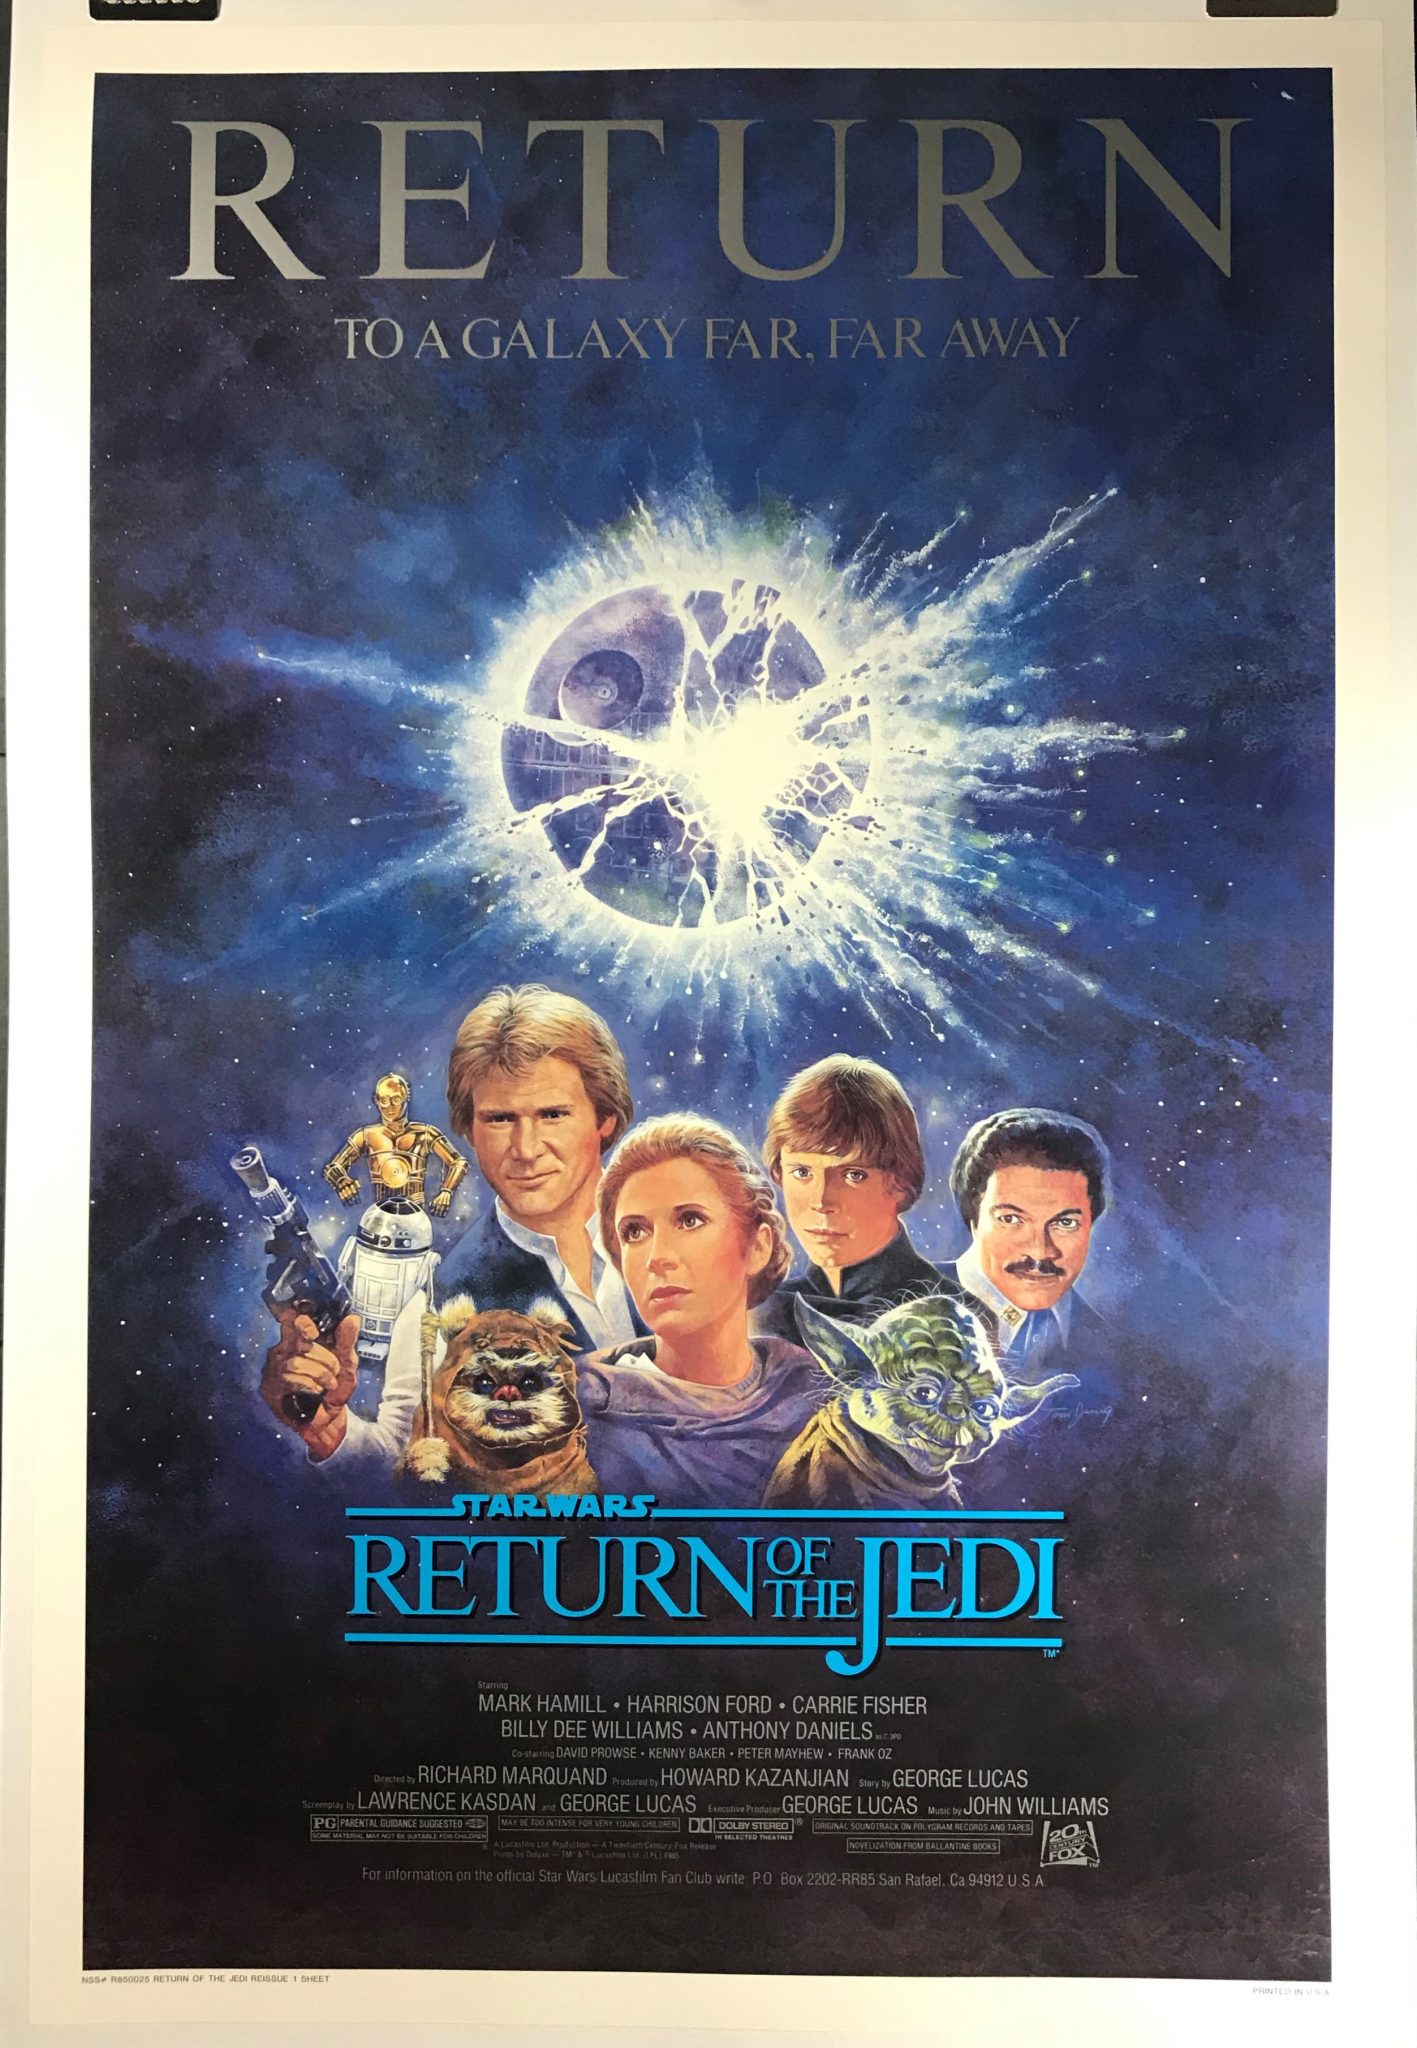 RETURN OF THE JEDI, Original Rolled 1 sheet movie Theater poster 1985